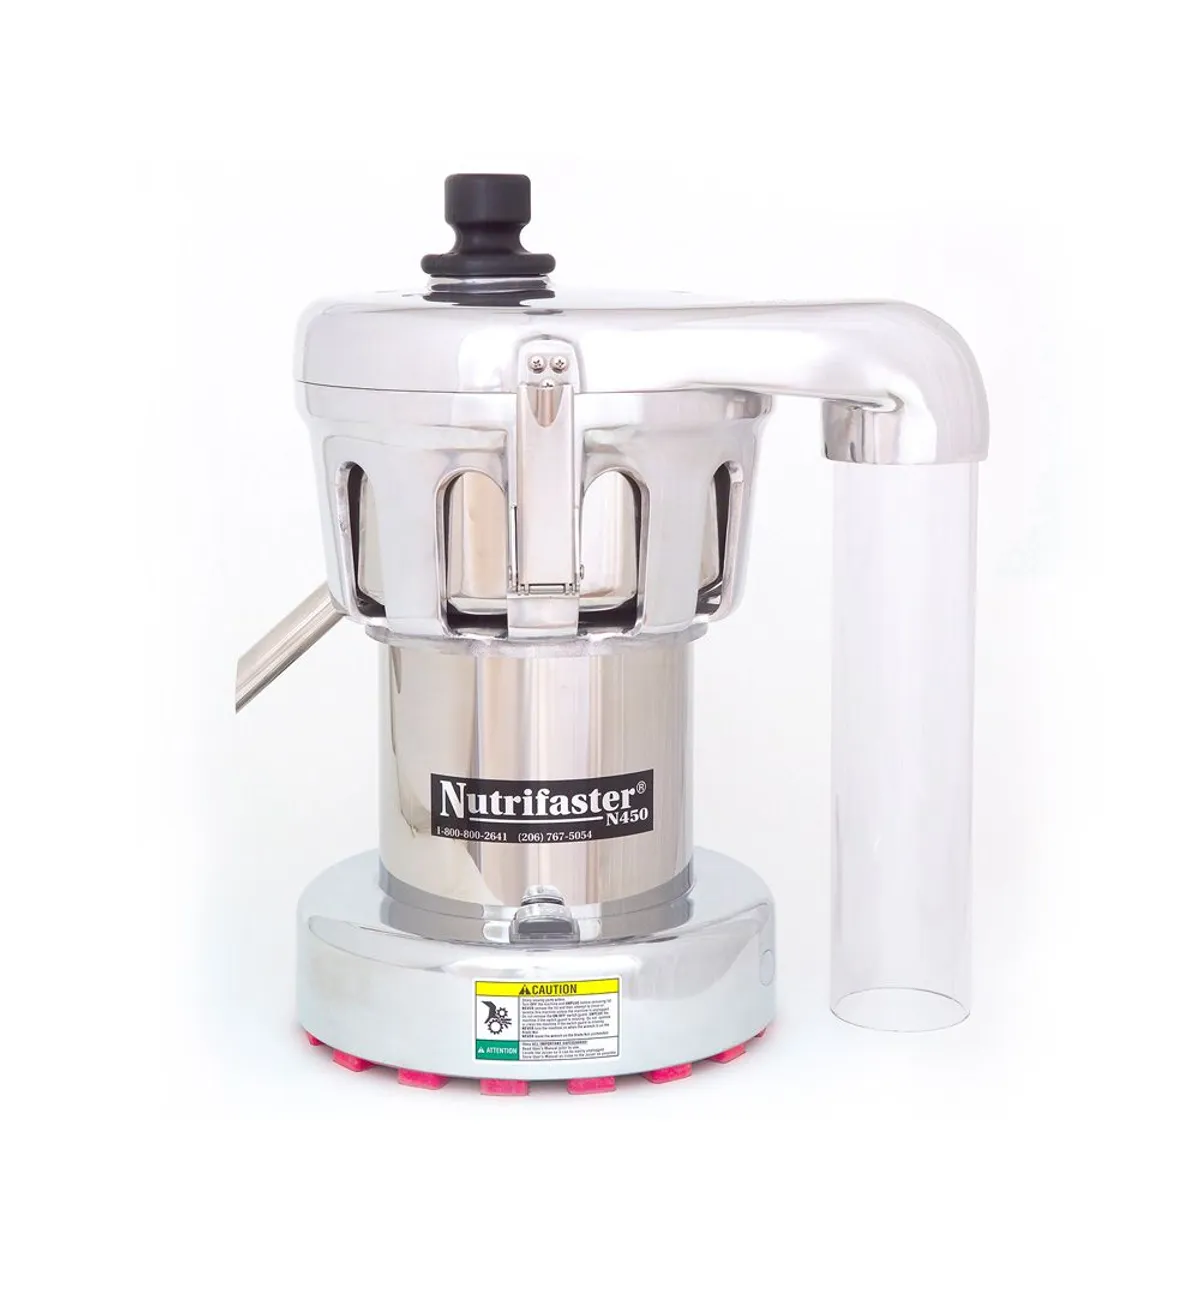 Nutrifaster N450 Commercial Centrifugal Juicer review